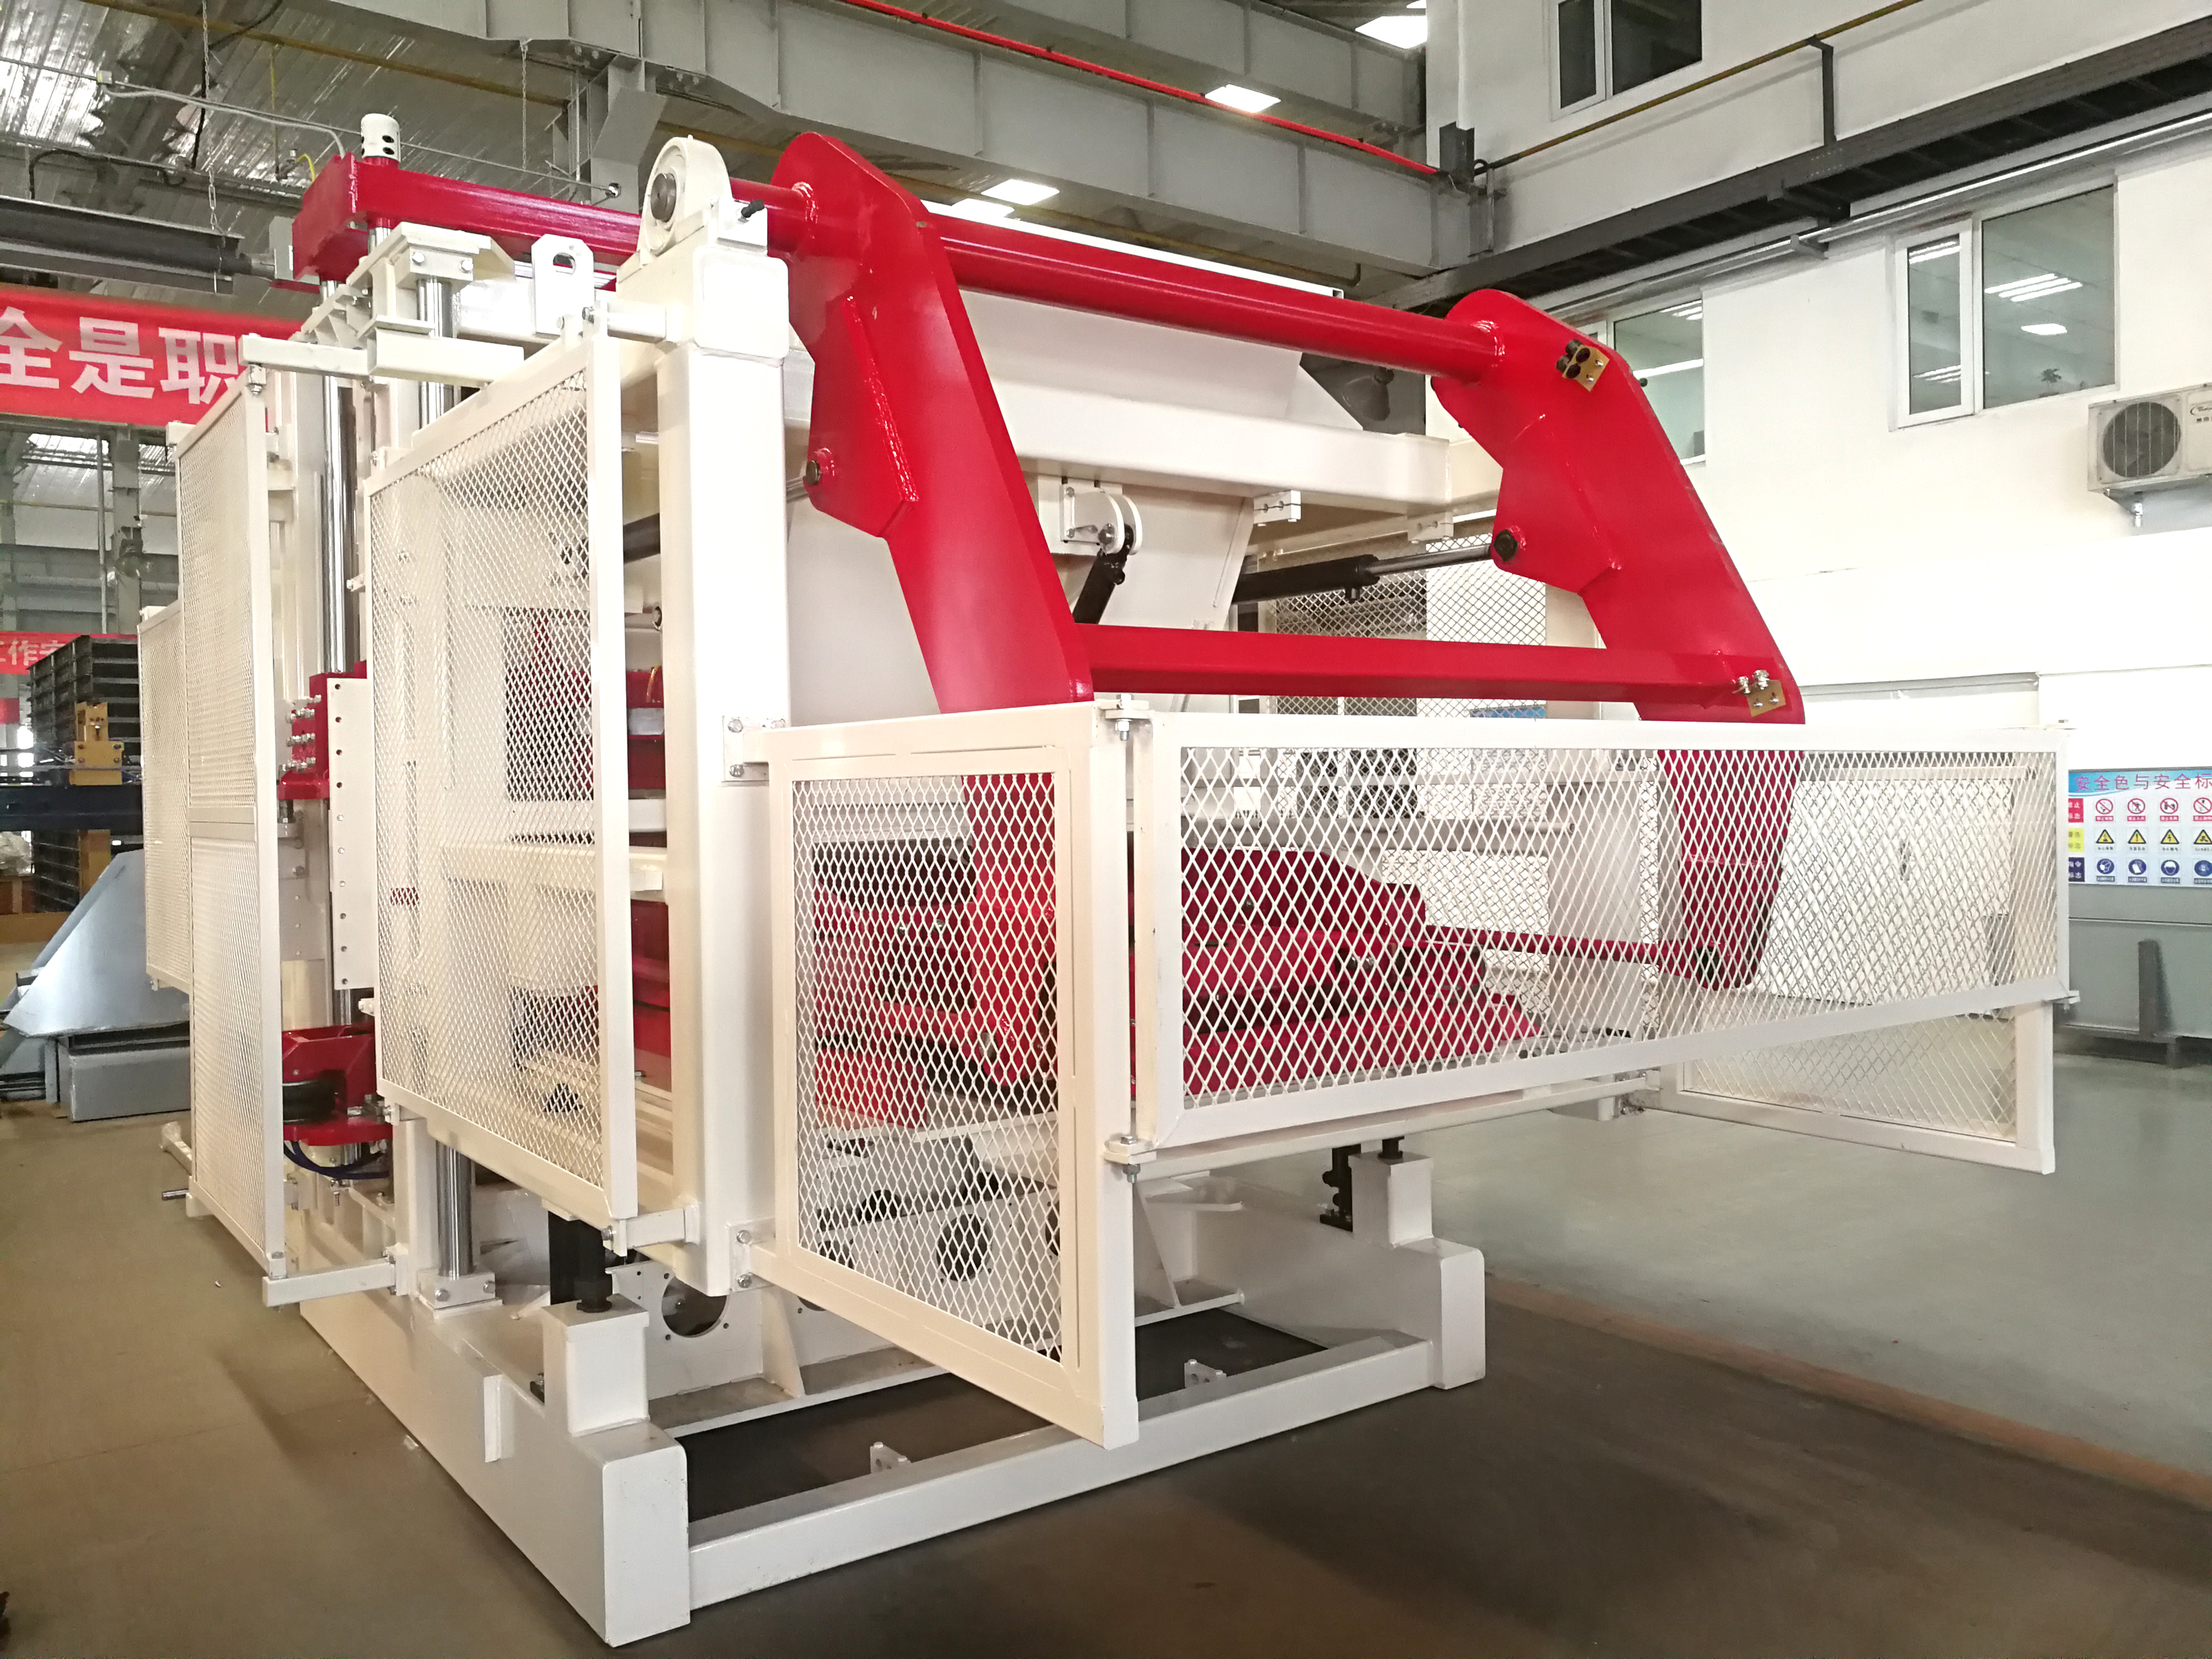 BDT-T9 Block Forming Machine (Red and white)